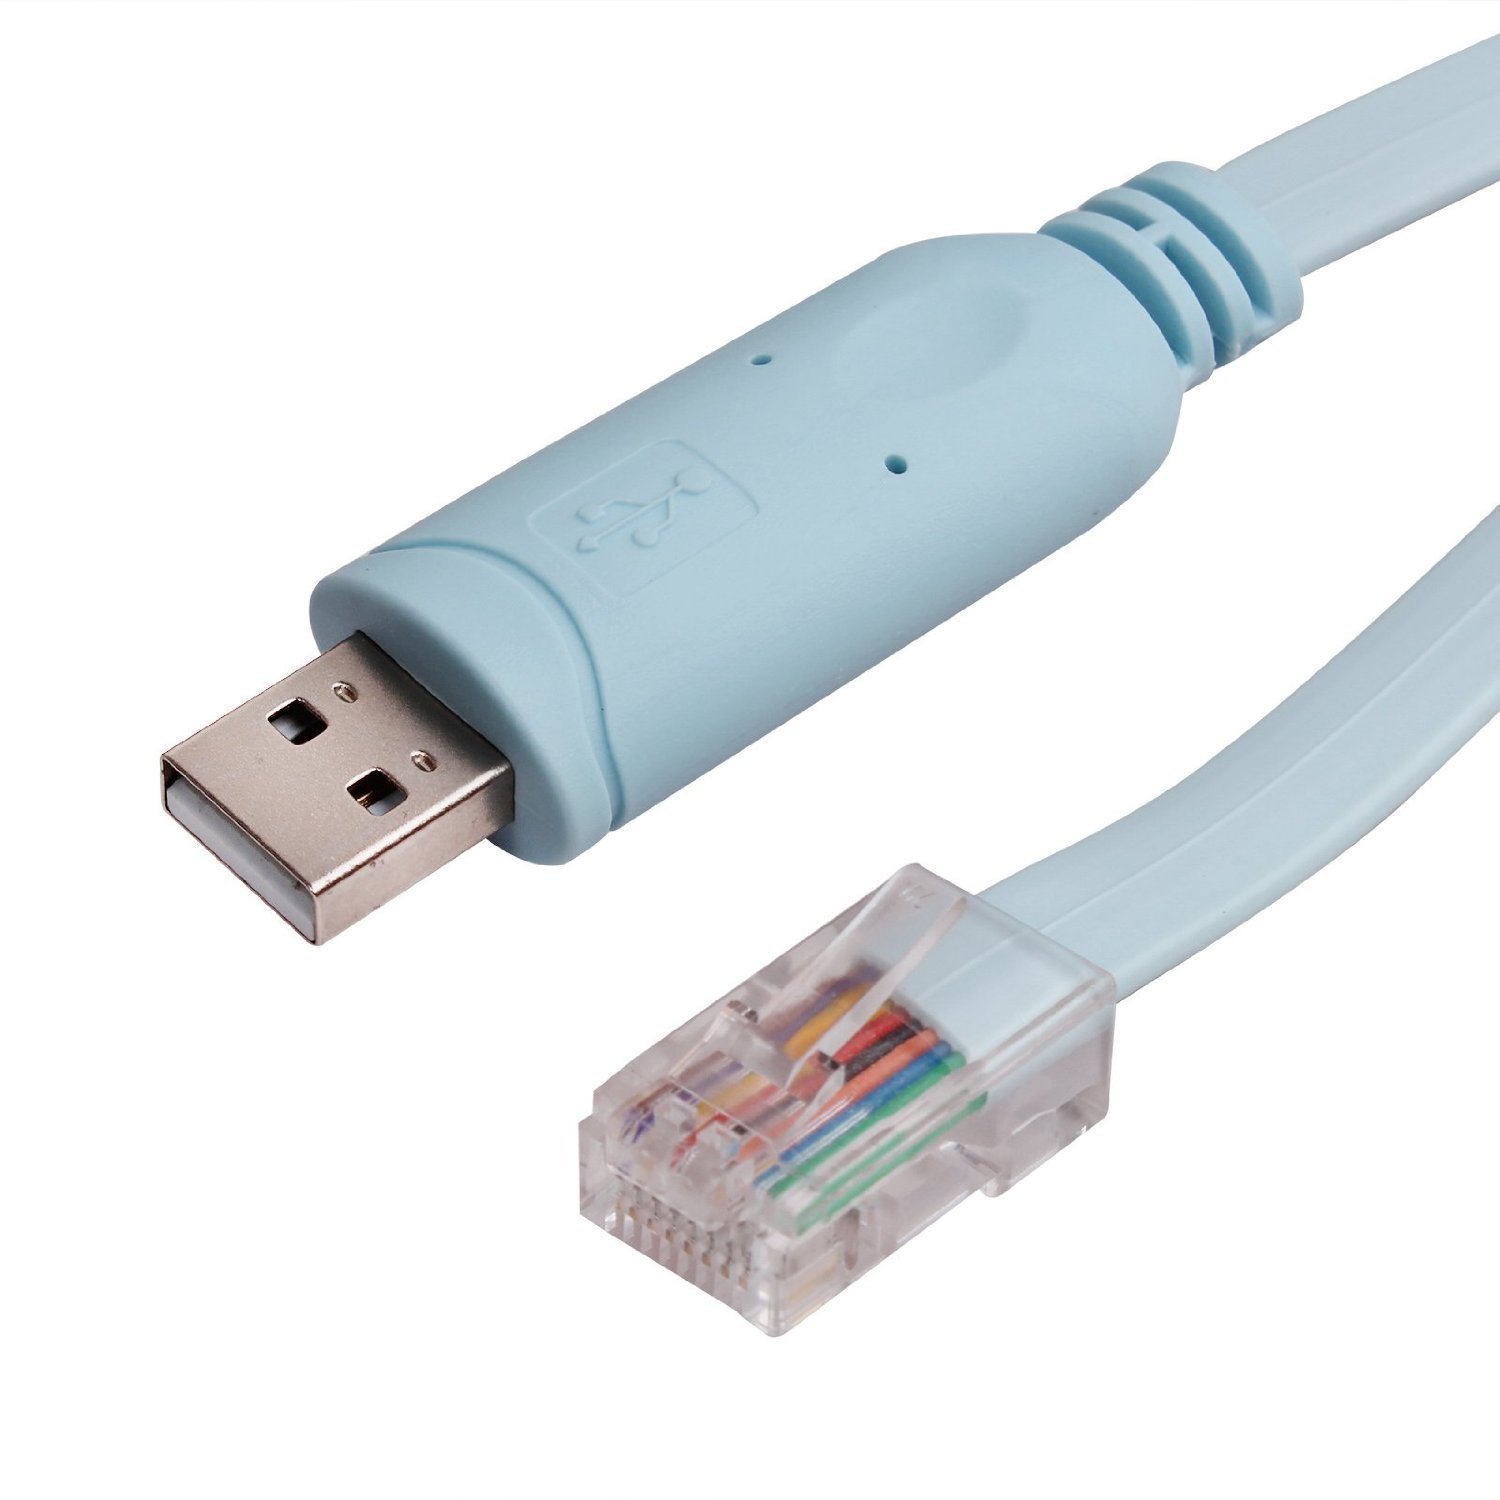 Usb to rj45 serial cable